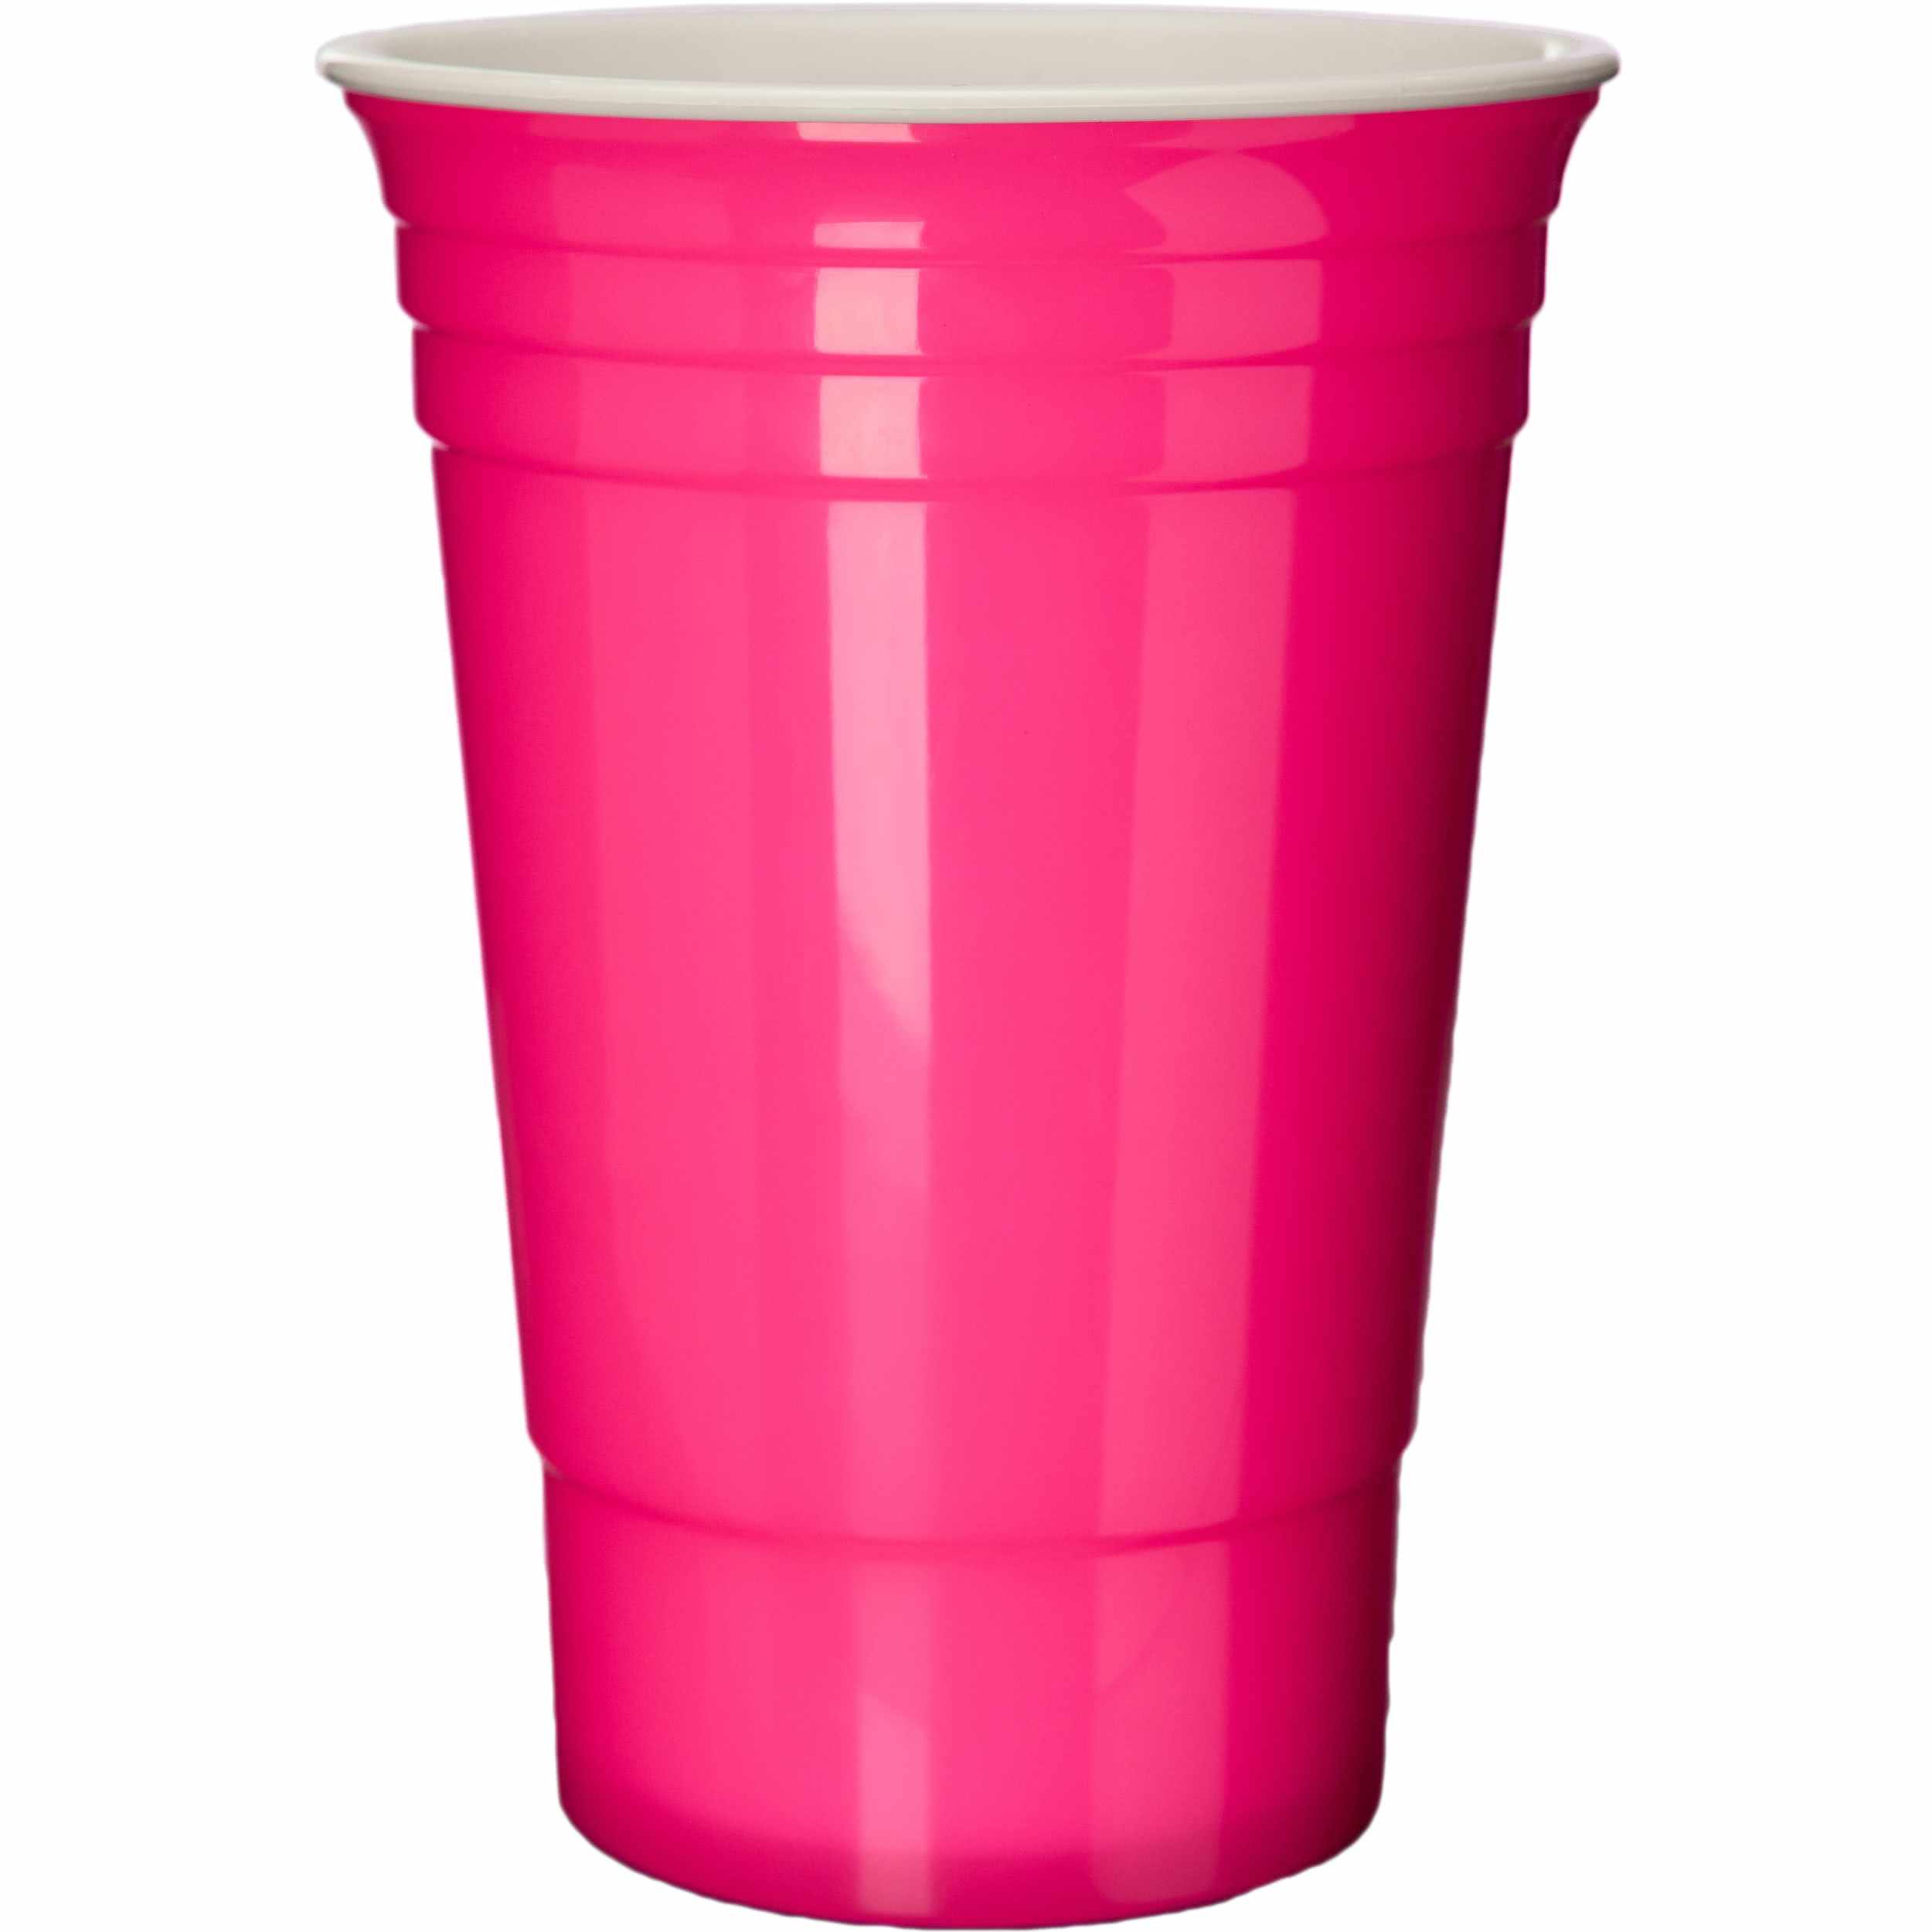 Solo cup